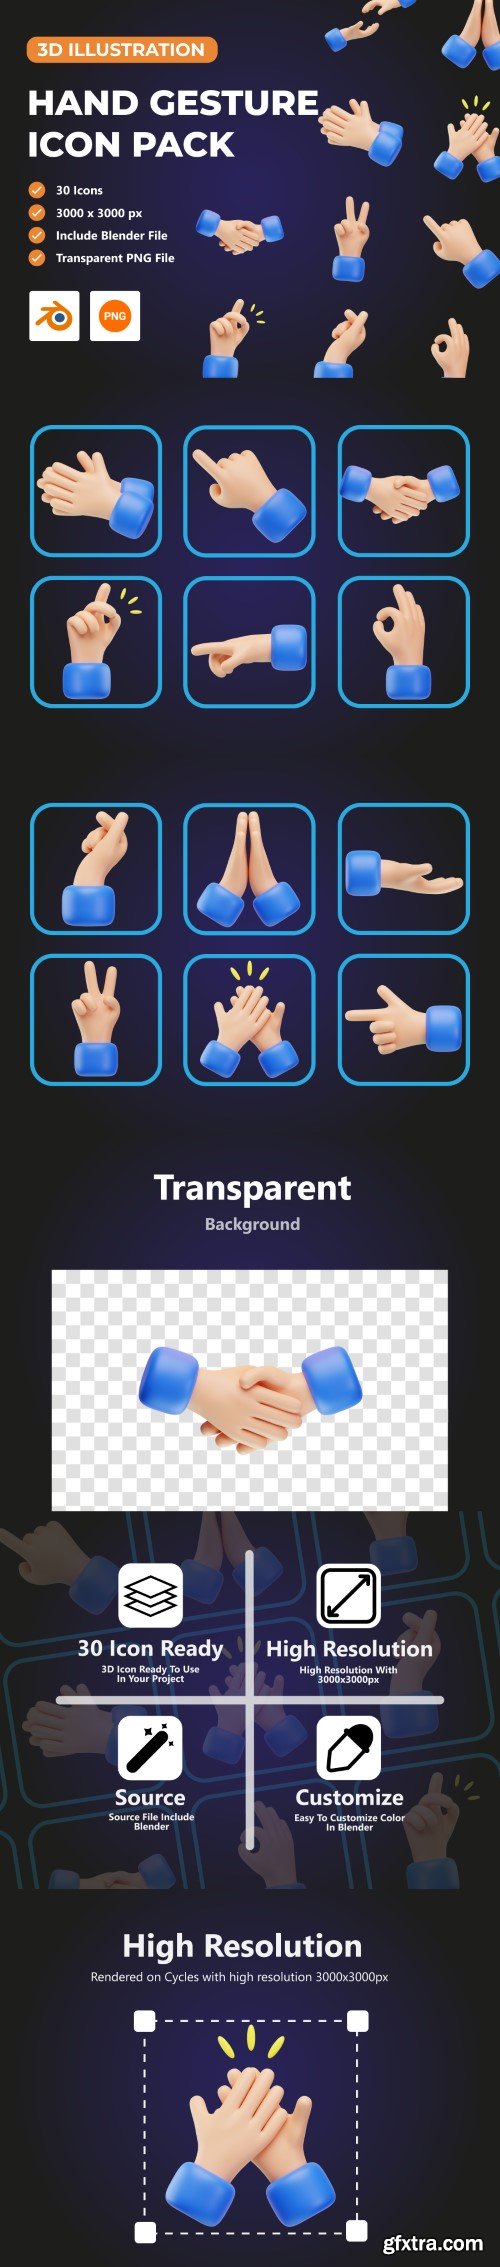 UI8 - Hand Gesture 3D Icon Pack